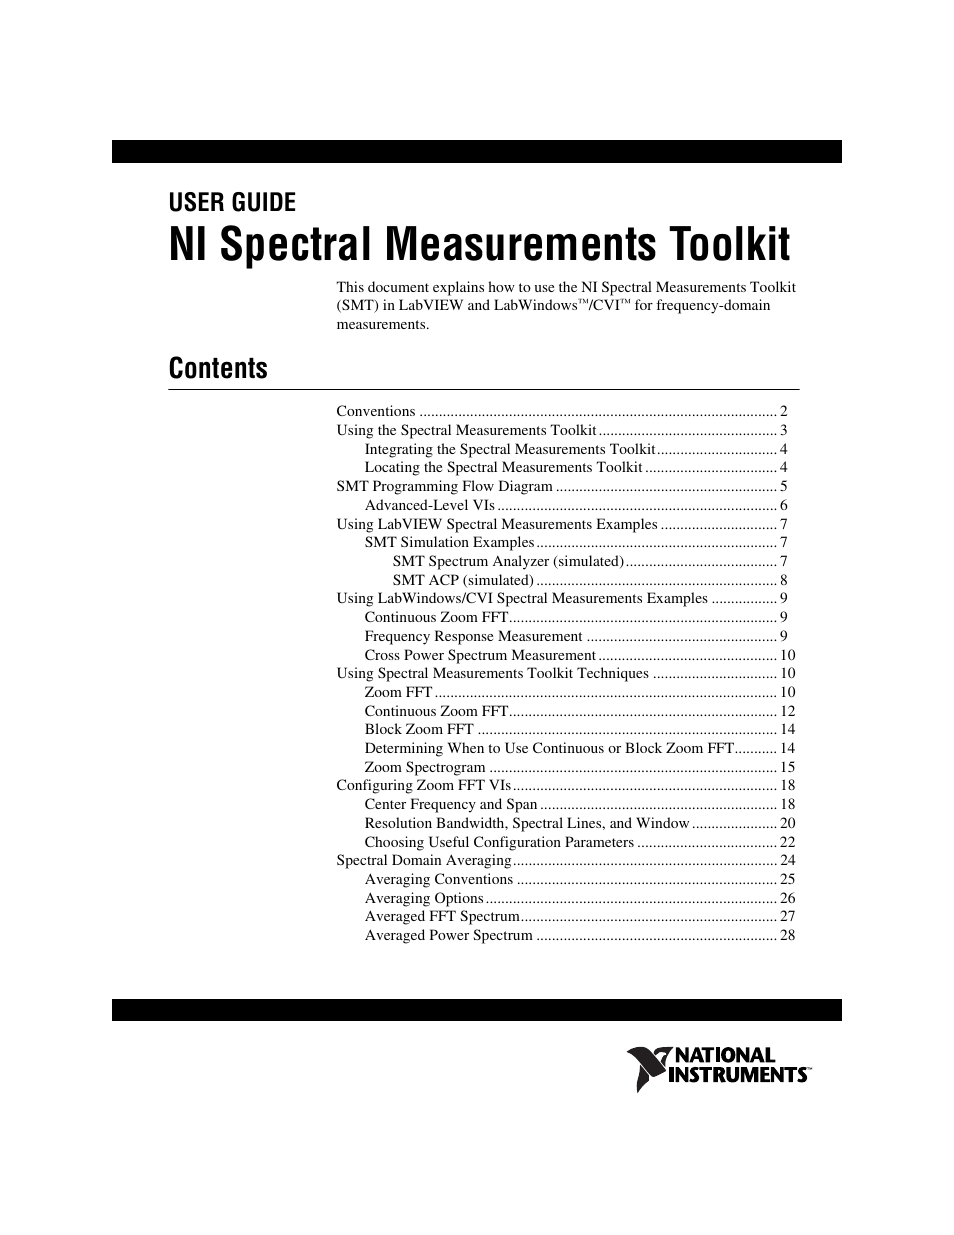 National Instruments NI Spectral Measurements Toolkit User Manual | 35 pages